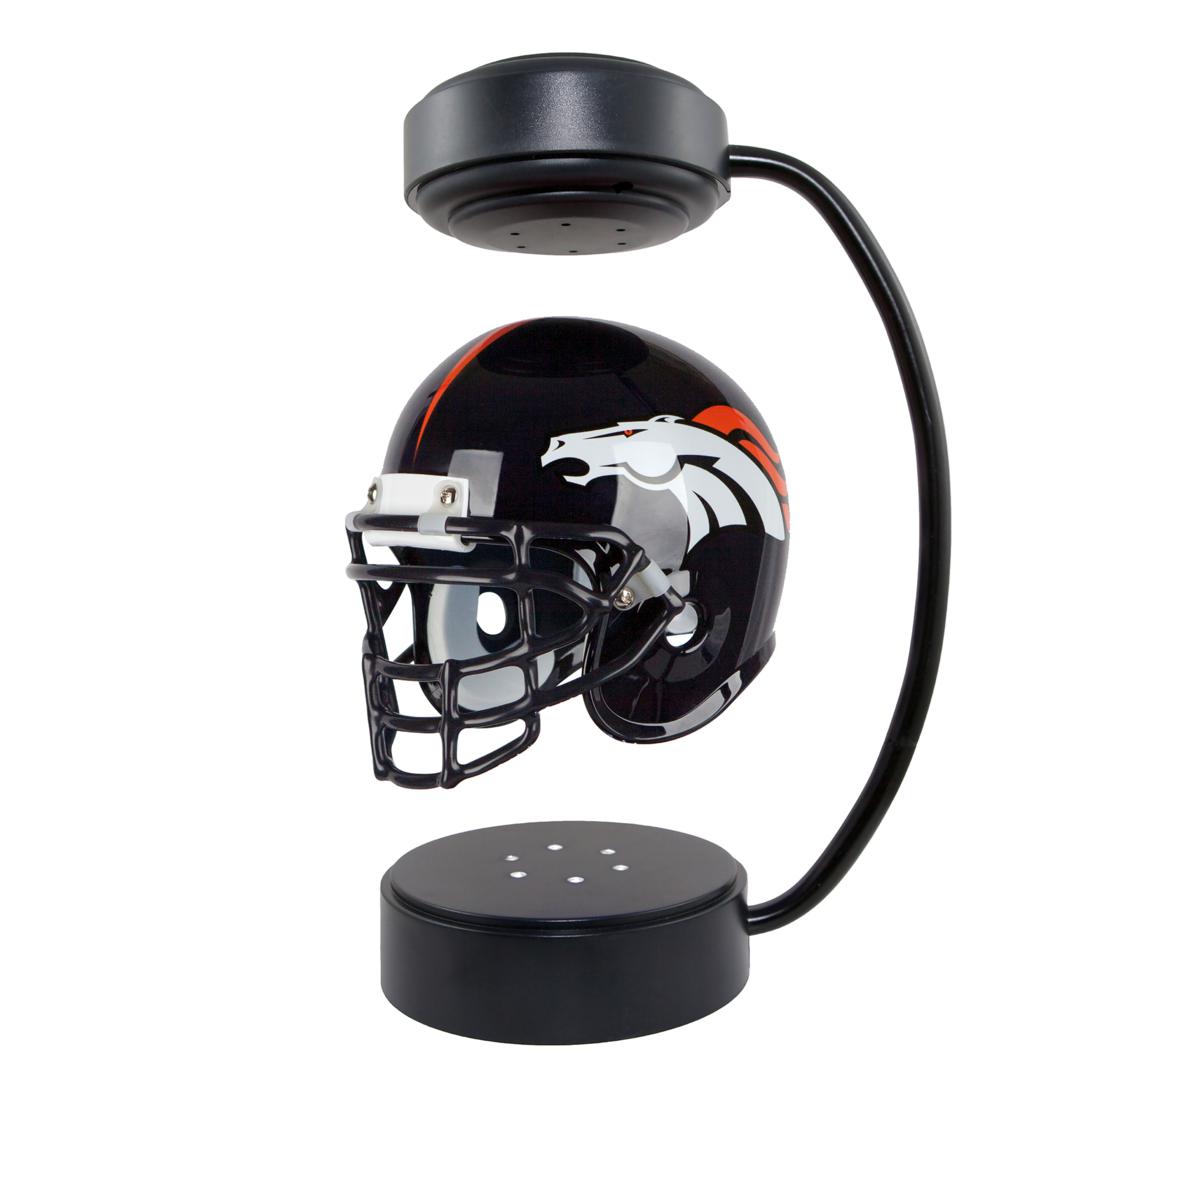 Officially Licensed NFL Hover Helmet by Pegasus Sports - Panthers